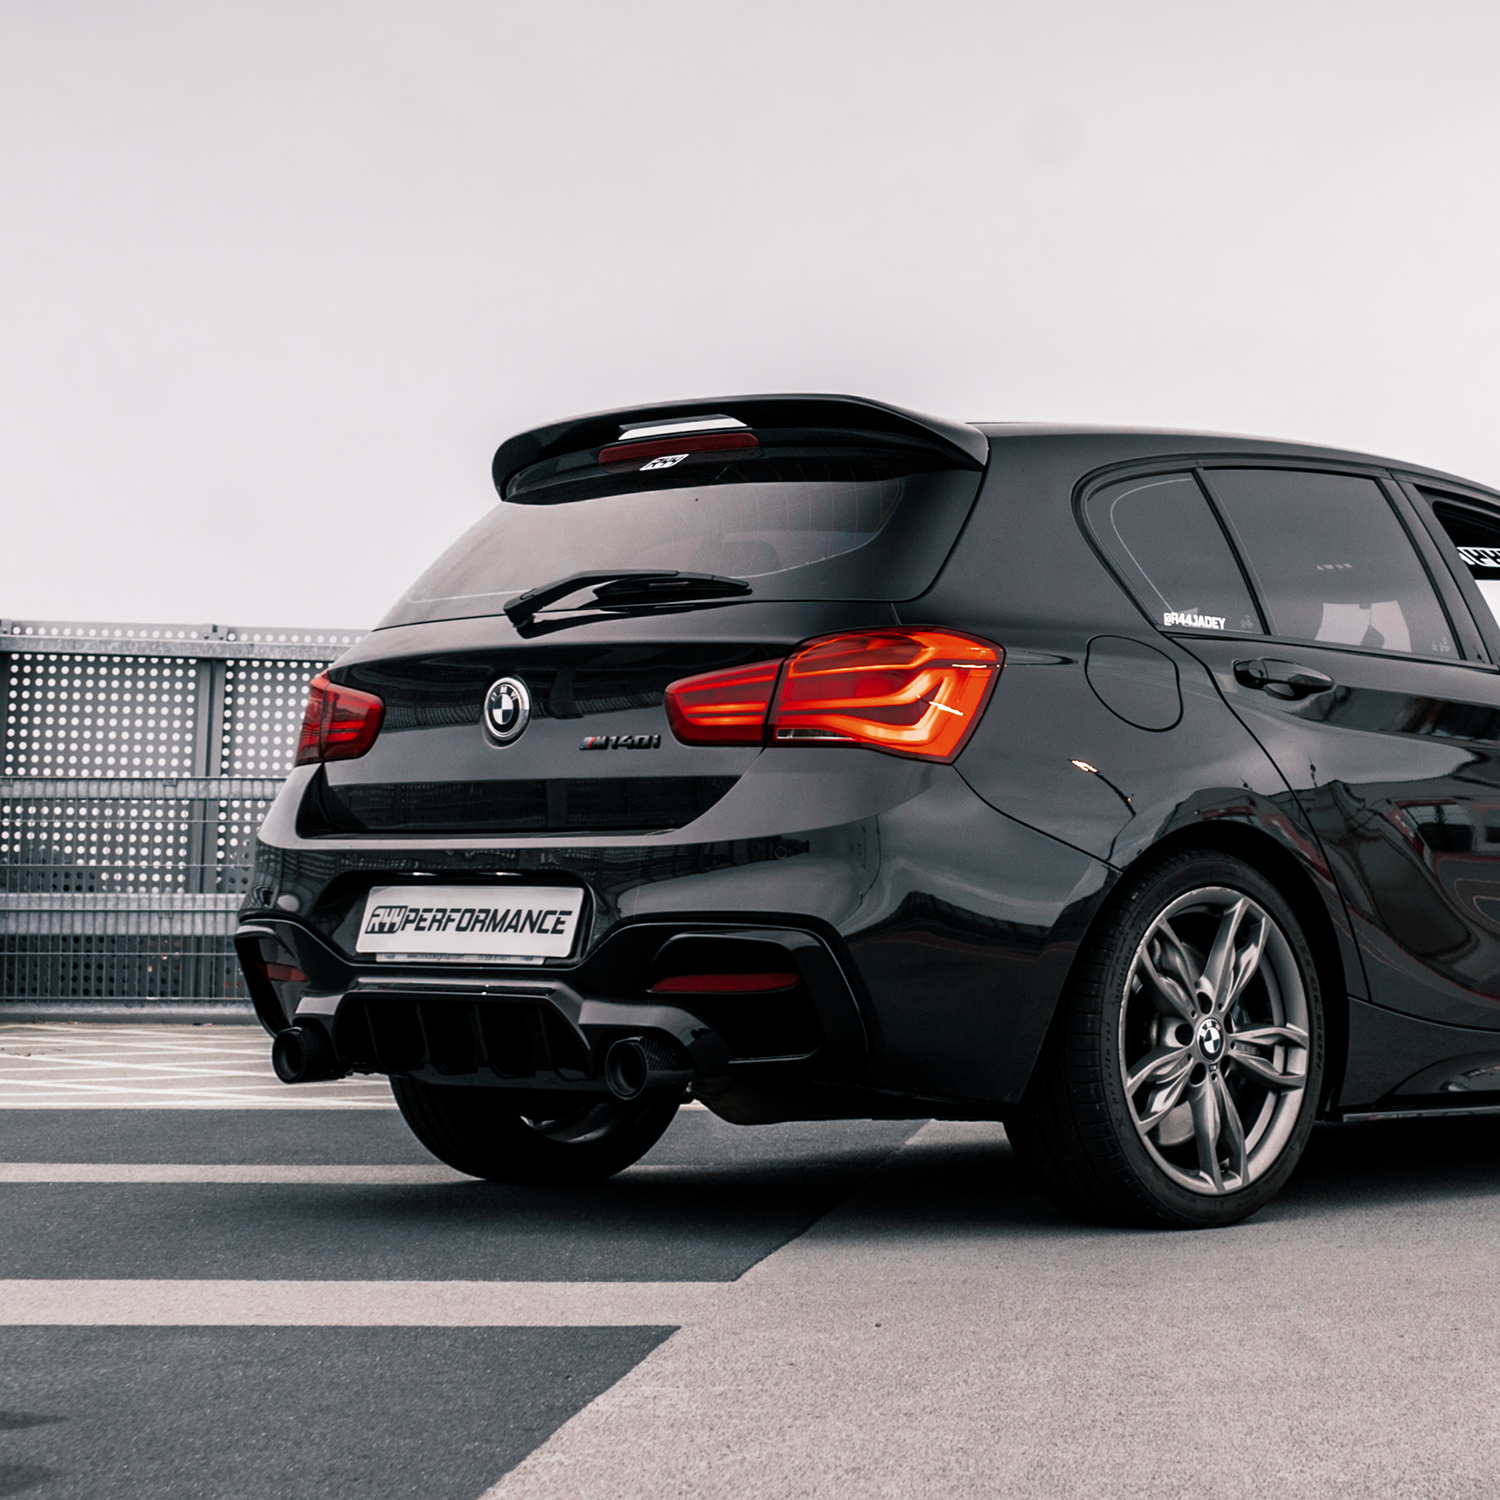 BMW 1 Series F20 F21 Gloss Black Rear Spoiler For Boot Lid - Fits BMW M140i & BMW M135i. Manufactured by MHC